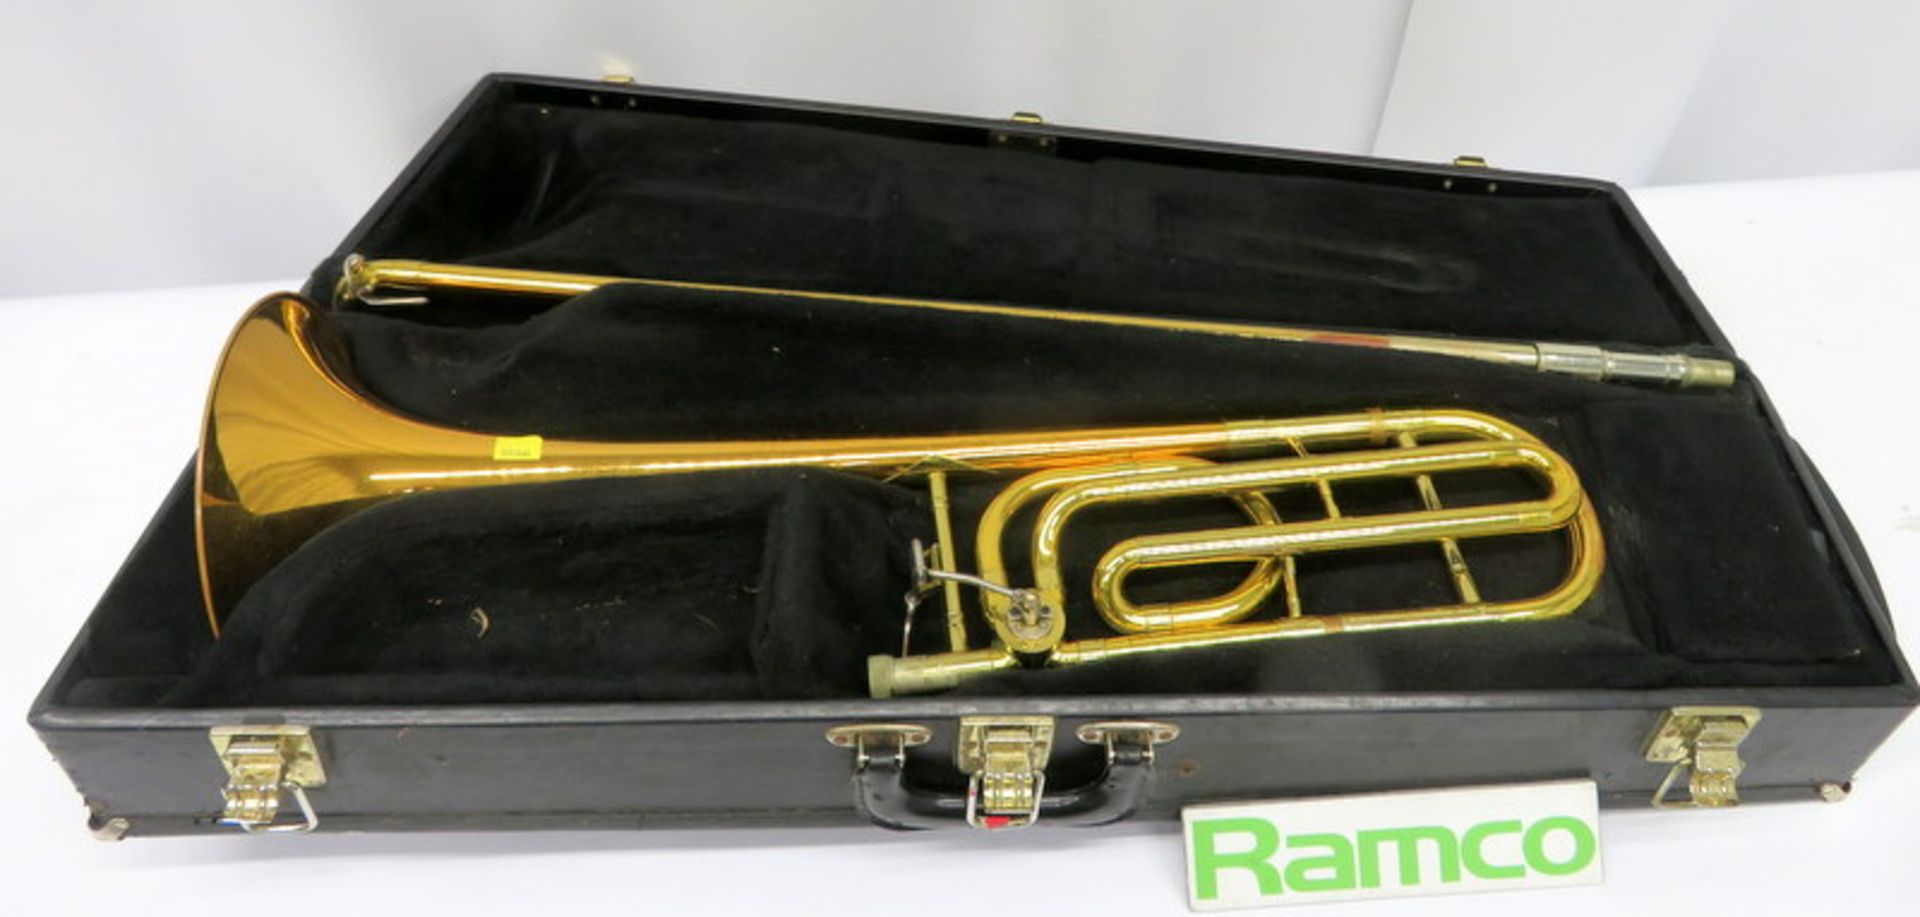 C G Conn 88H Trombone With Case. Serial Number: 817081. Please Note That This Item Has N